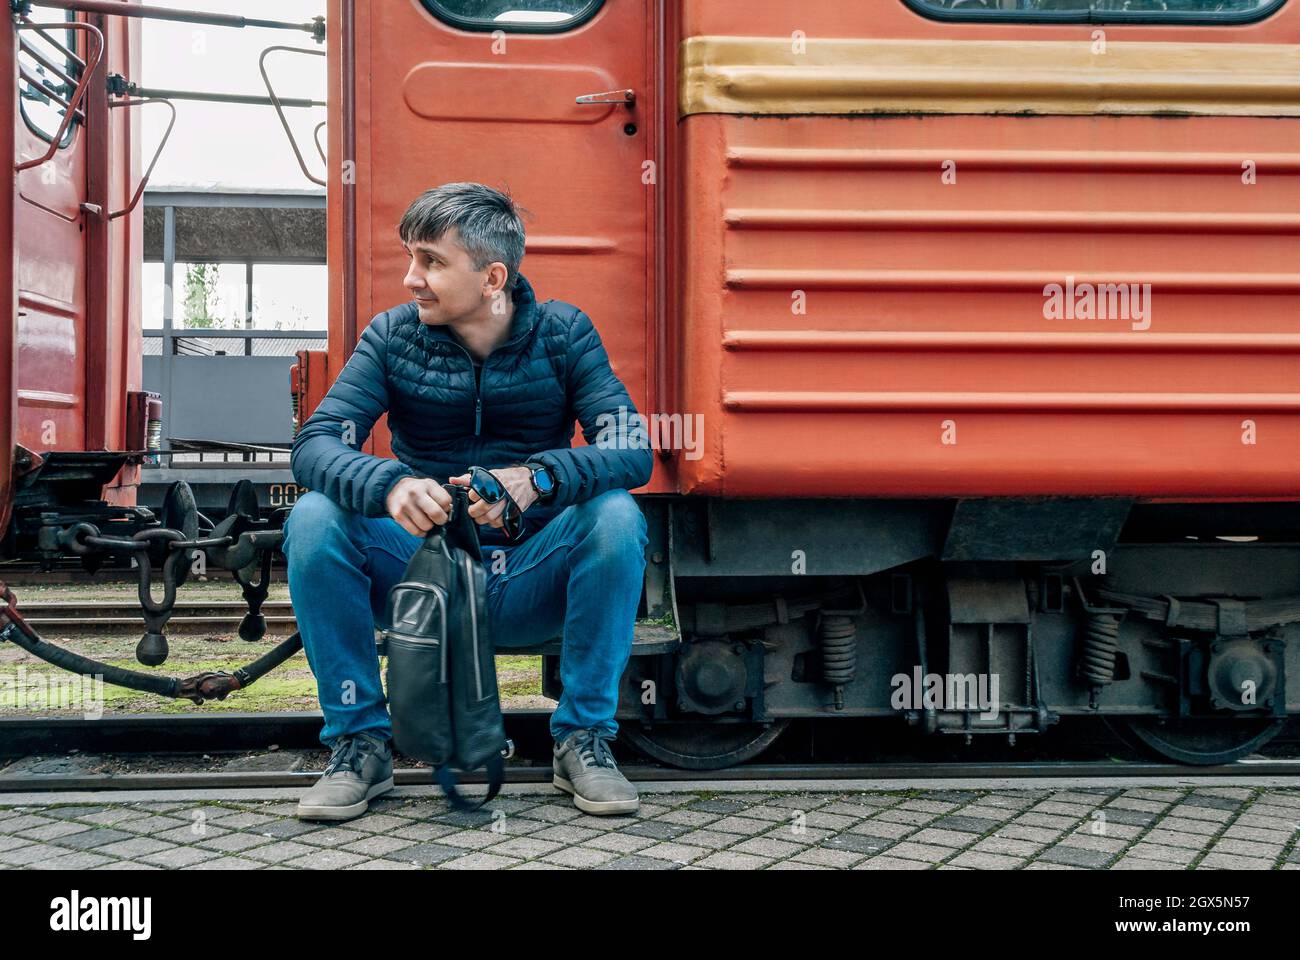 A man sitting on the background of an old train looks to the left Stock Photo